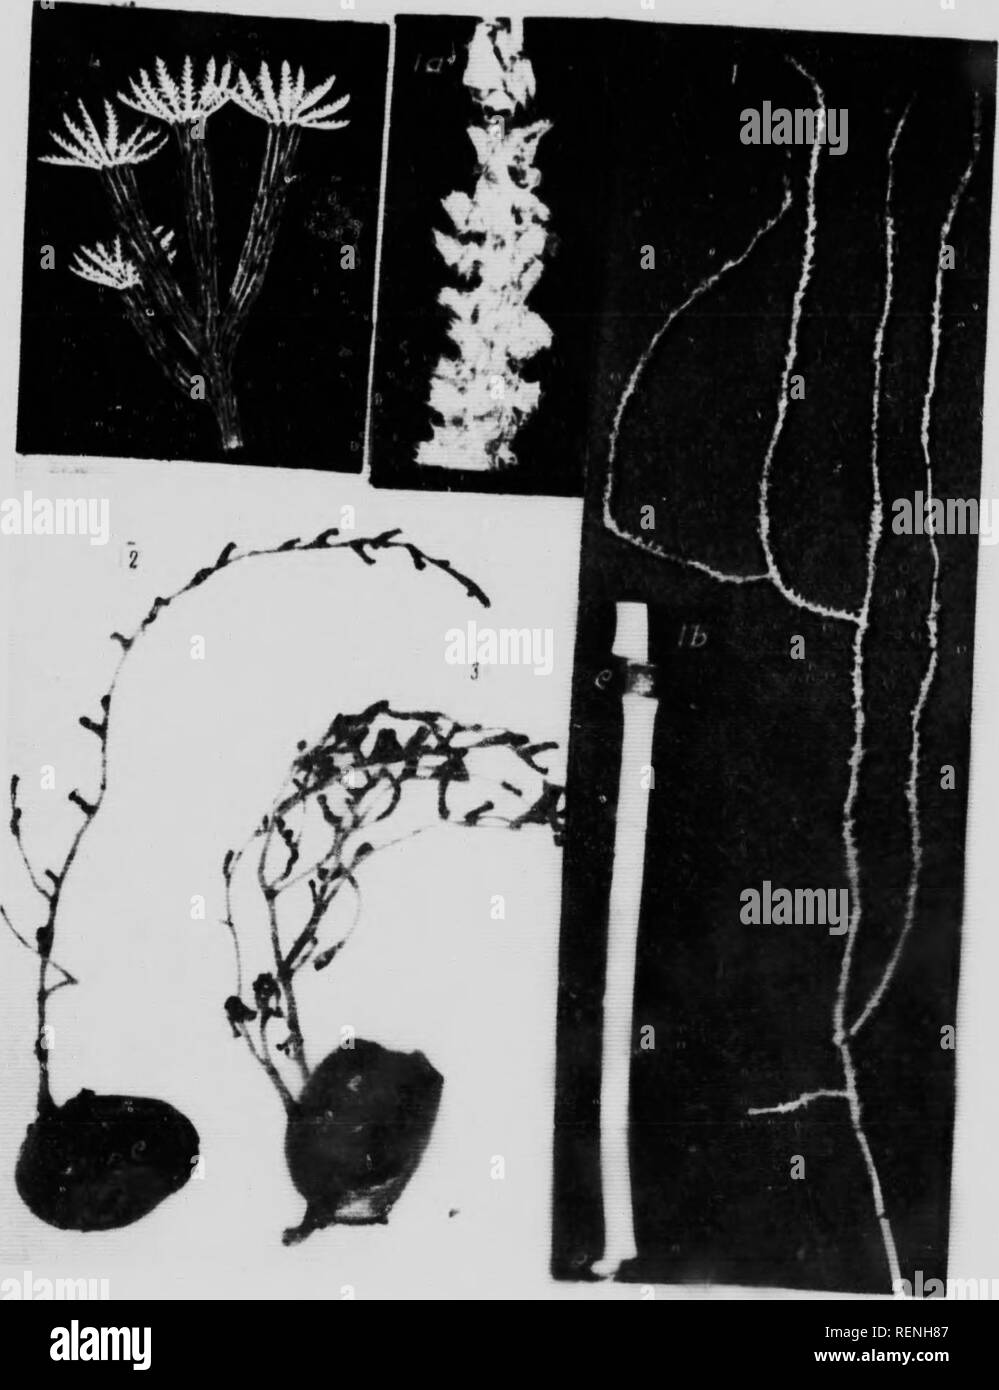 . Mollusks, Echnioderms, Coelenterates, etc. Part G [microform] : Alcyonaria and Actinaria. Canadian Arctic Expedition (1913-1918); Canadian Arctic Expedition (1913-1918); Sea anemones; Alcyonaires; Anémones de mer; Octocorallia. Aleyoniiriii r.Hl VUTt XVI.. 9343 ti mmi. Please note that these images are extracted from scanned page images that may have been digitally enhanced for readability - coloration and appearance of these illustrations may not perfectly resemble the original work.. Verrill, A. E. (Addison Emery), 1839-1926; Canadian Arctic Expedition (1913-1918). Ottawa : F. A. Acland Stock Photo